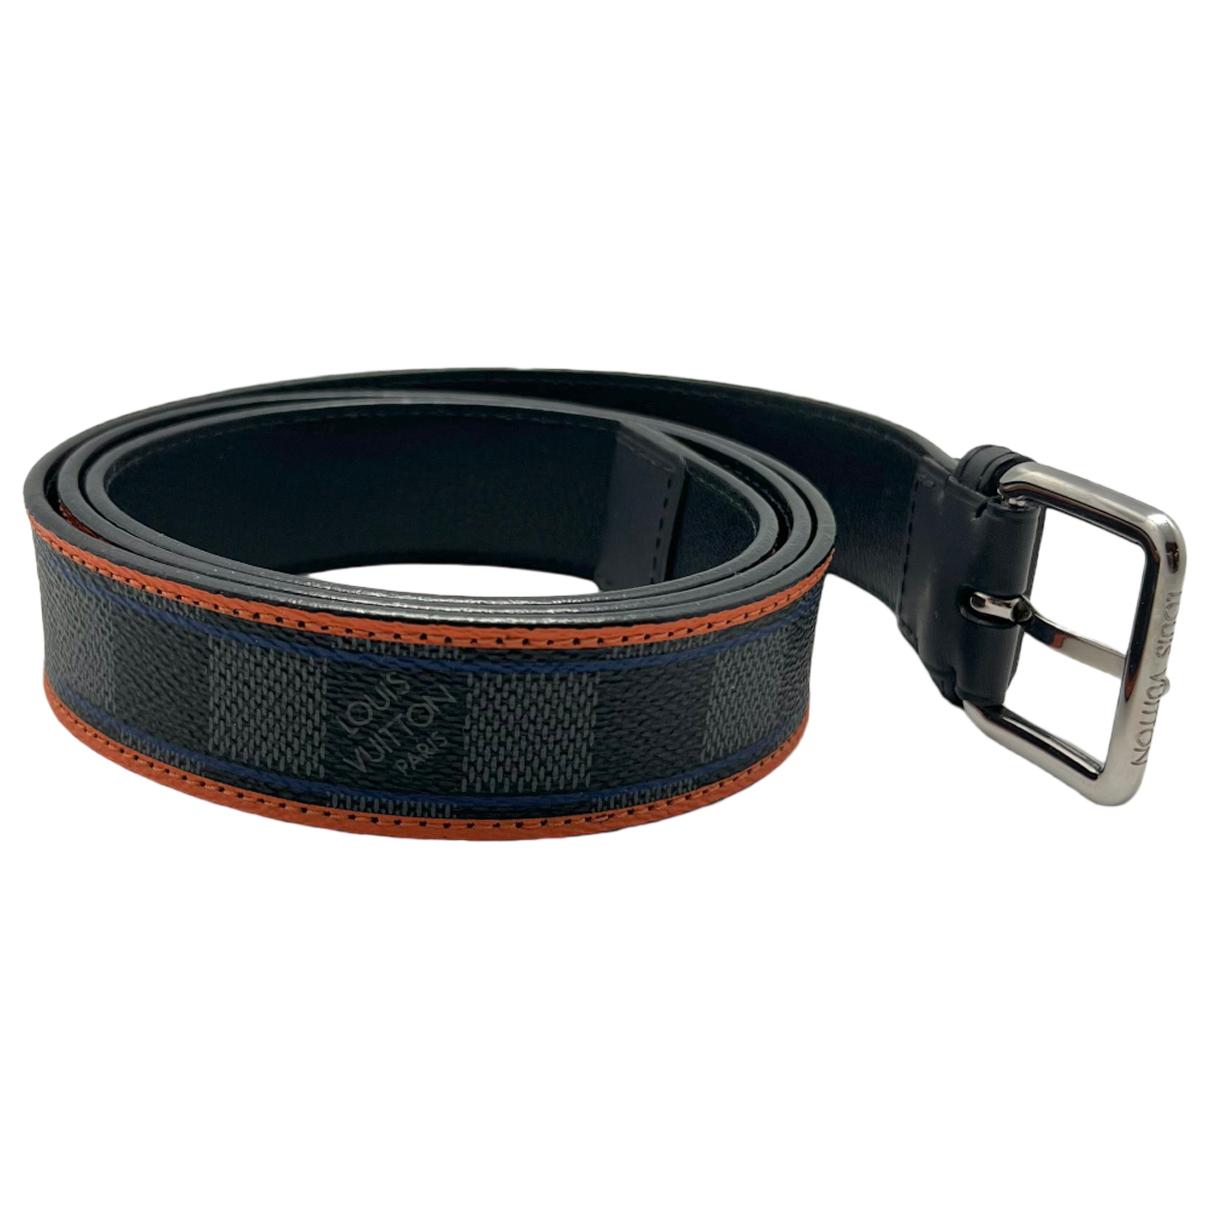 Initiales leather belt Louis Vuitton Black size 95 cm in Leather - 32522385